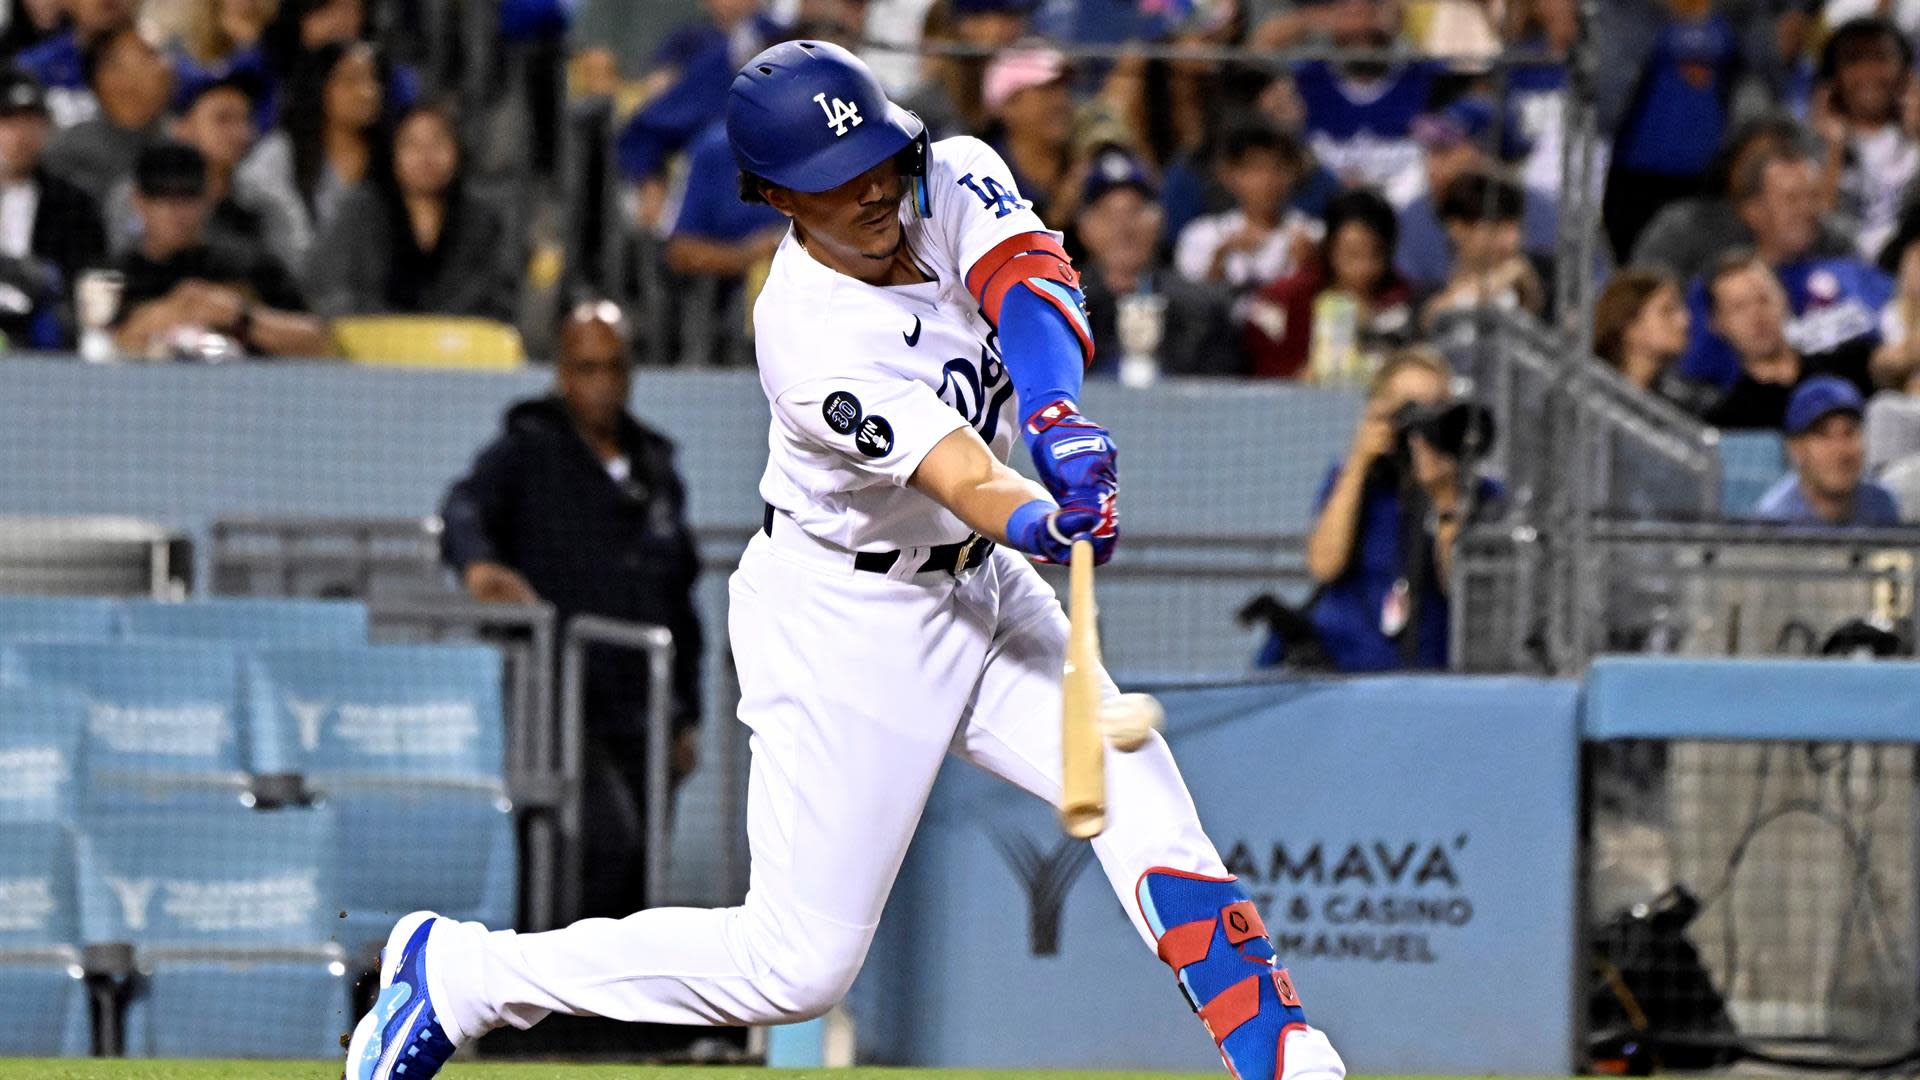 One Dodgers rookie stopped swinging because he had to. Data says more MLB  hitters should follow suit